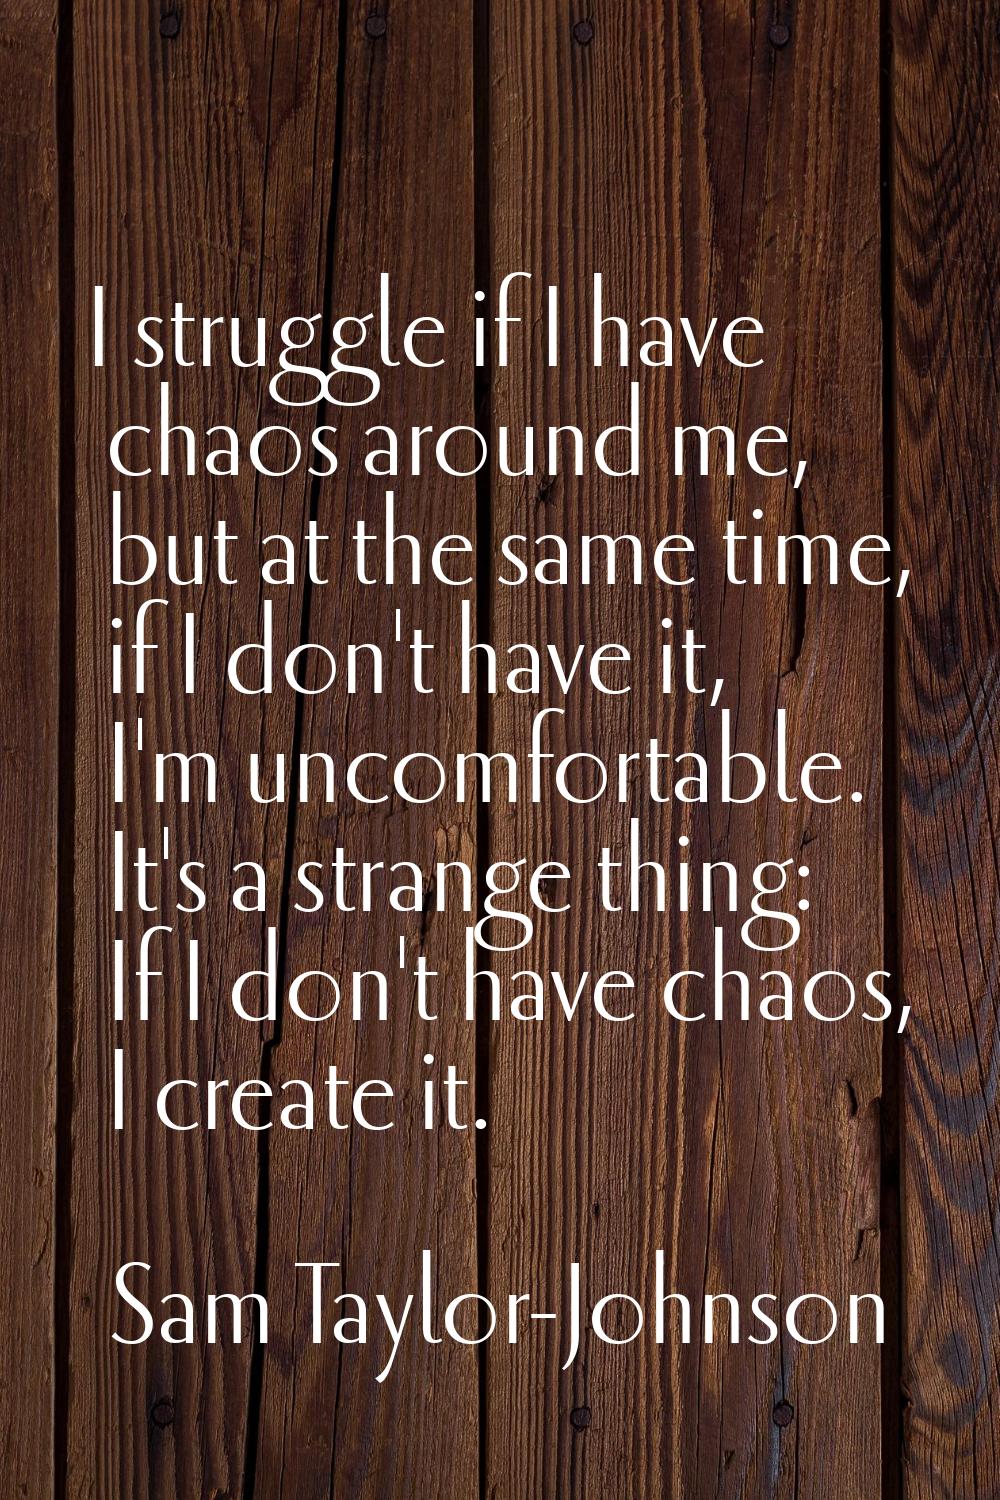 I struggle if I have chaos around me, but at the same time, if I don't have it, I'm uncomfortable. 